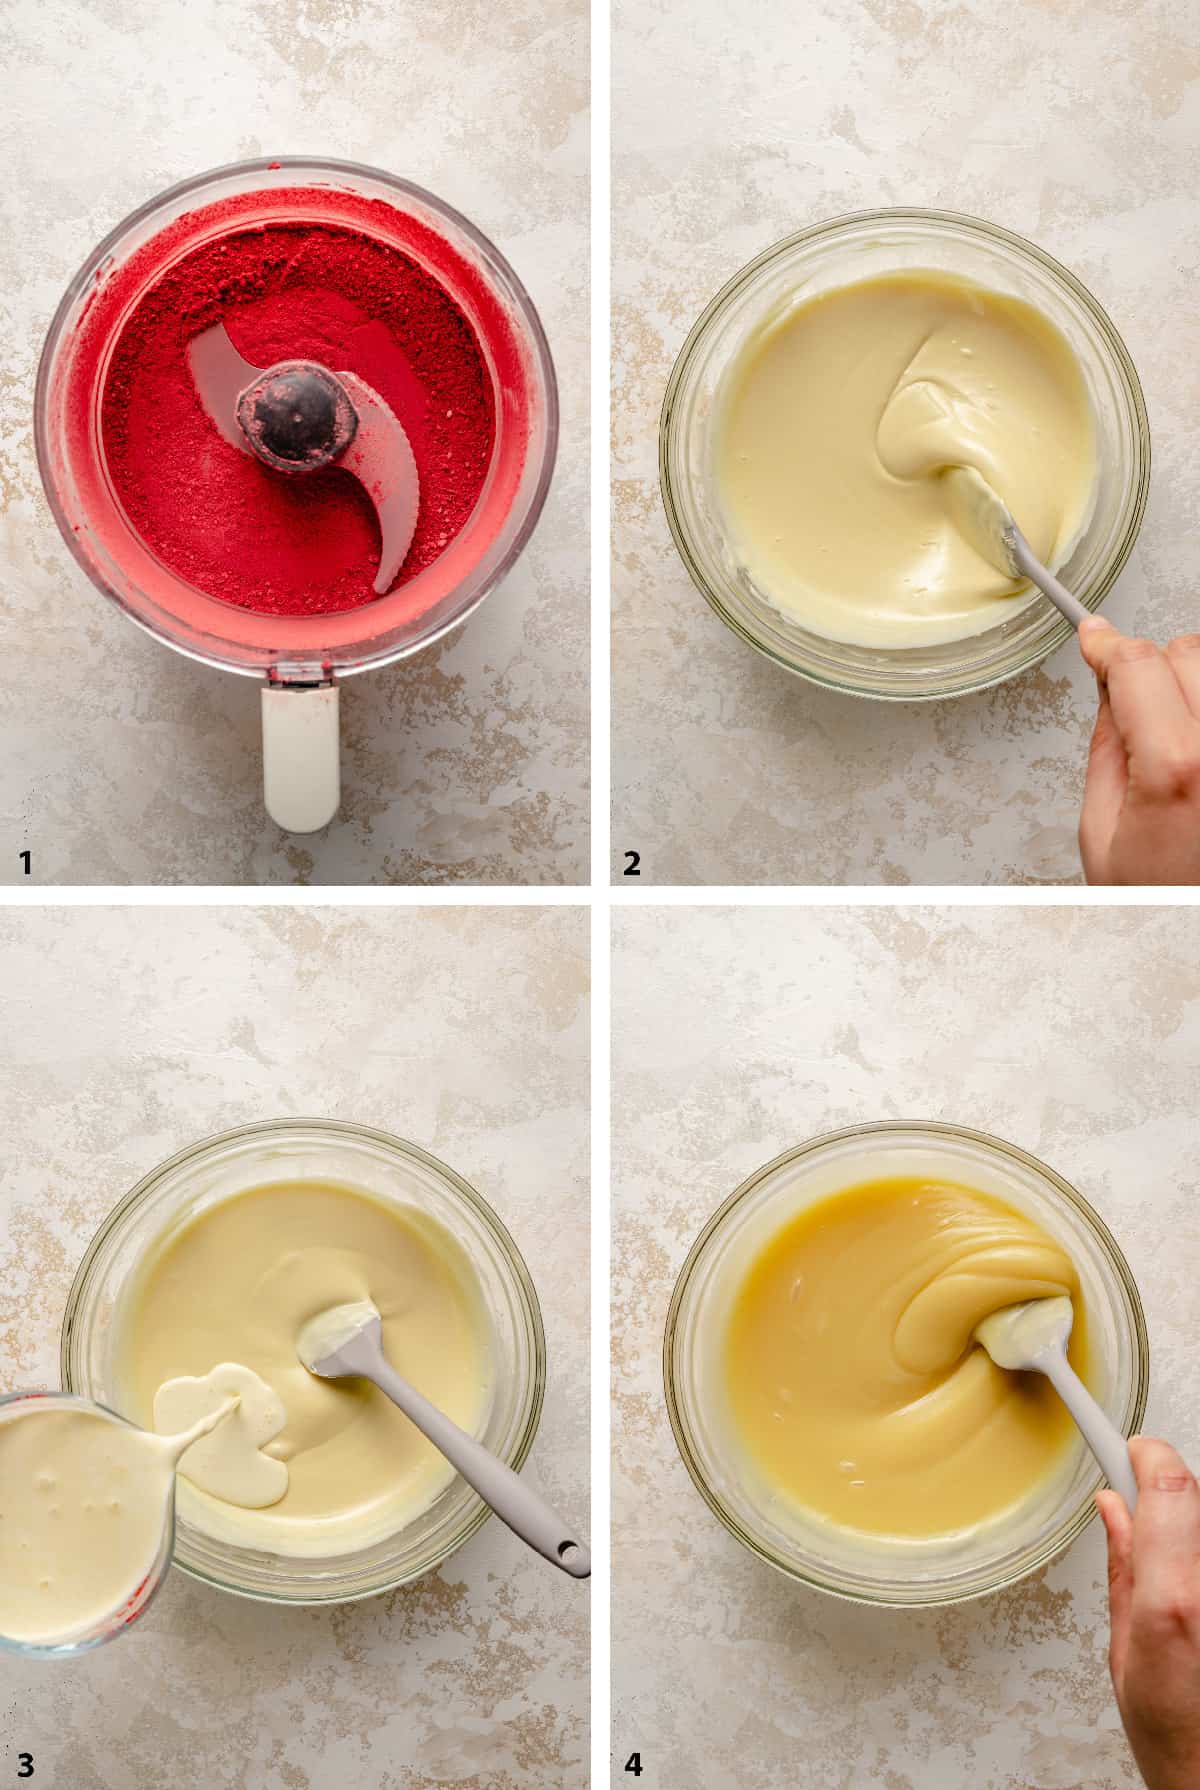 Process of blending the strawberries, melted chocolate, pouring cream in and stirring a ganache in a bowl.